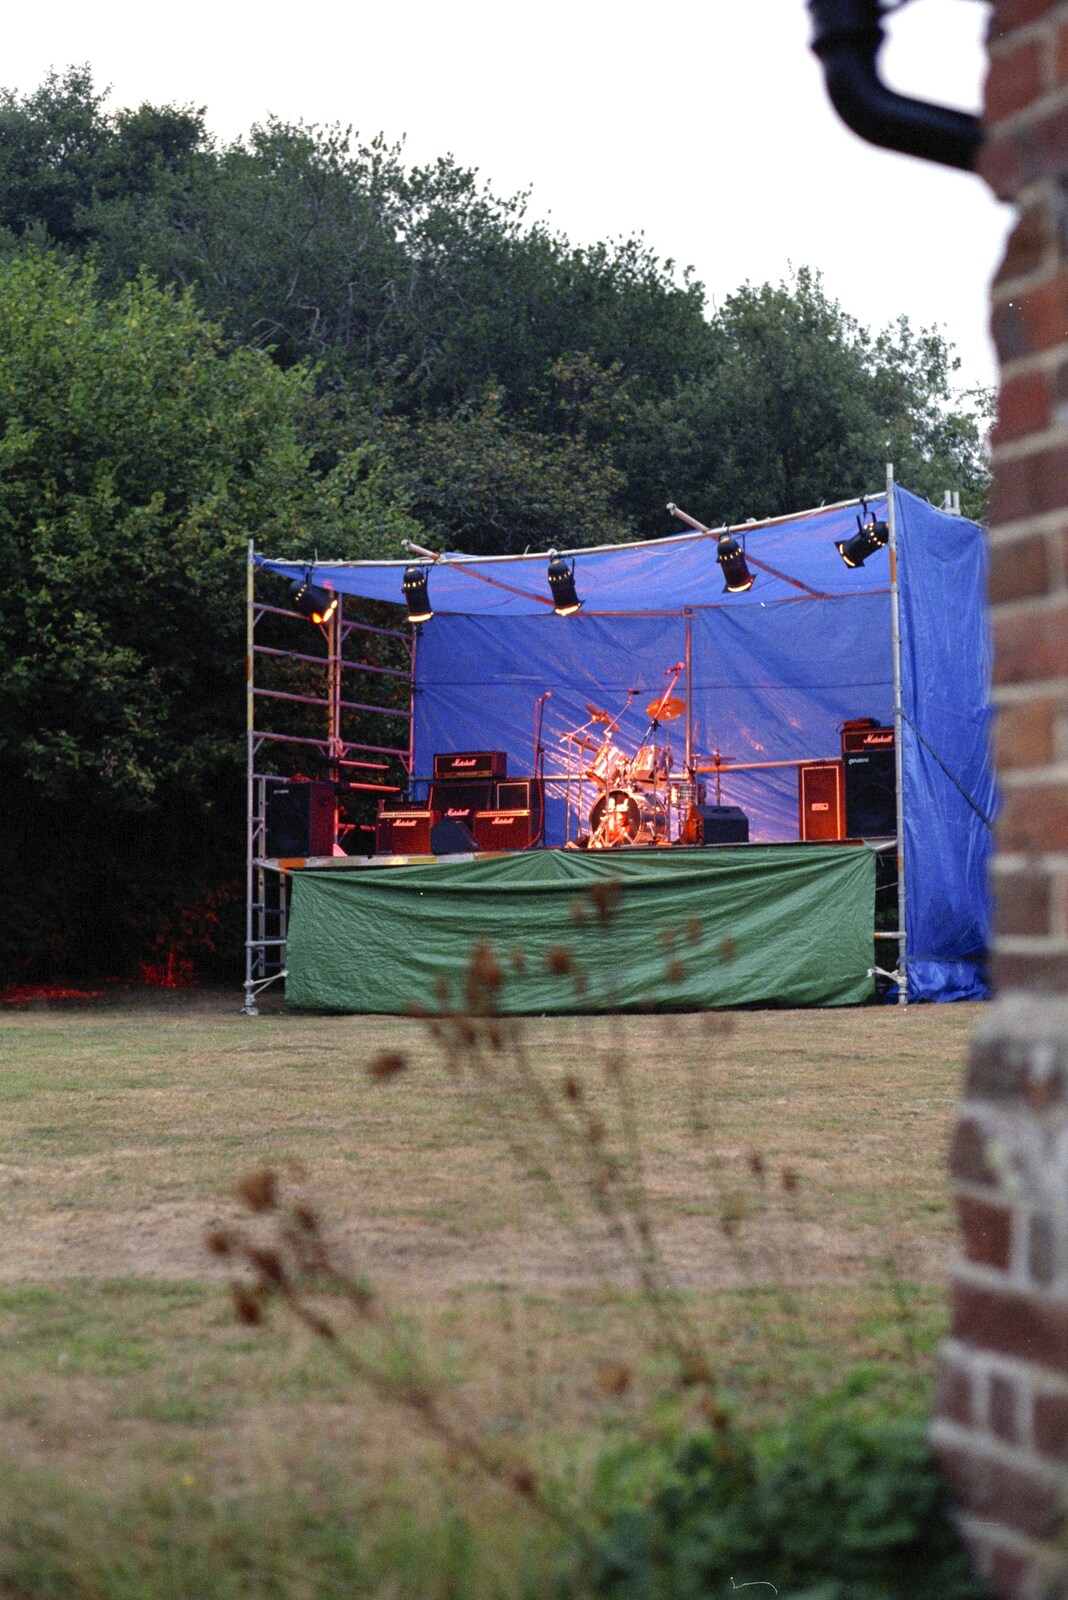 The stage is set from Sean's ElstedBury Festival, Elsted, West Sussex - 12th July 1996